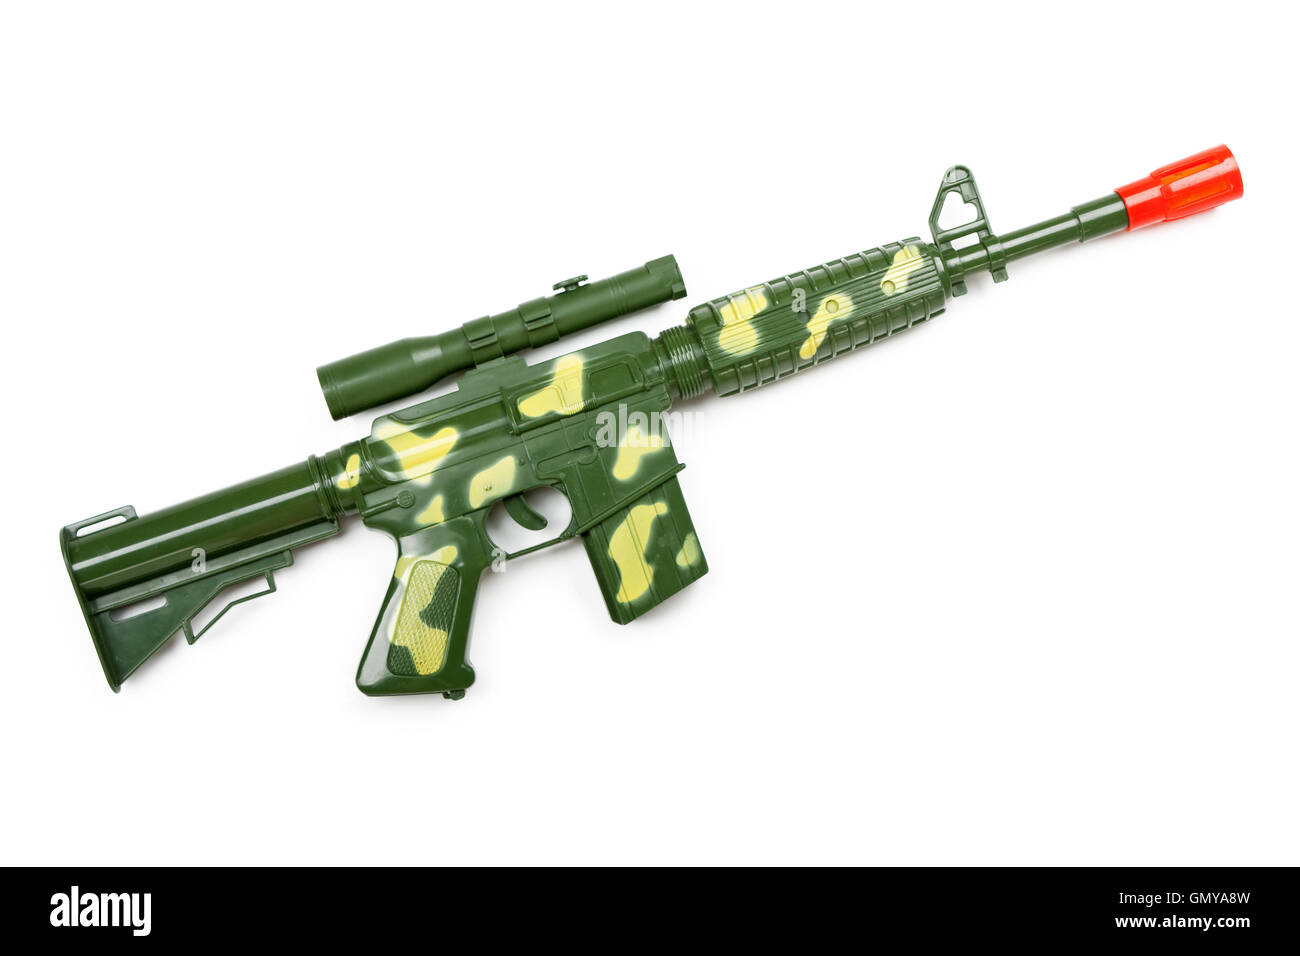 Toy Rifle High Resolution Stock Photography and Images - Alamy